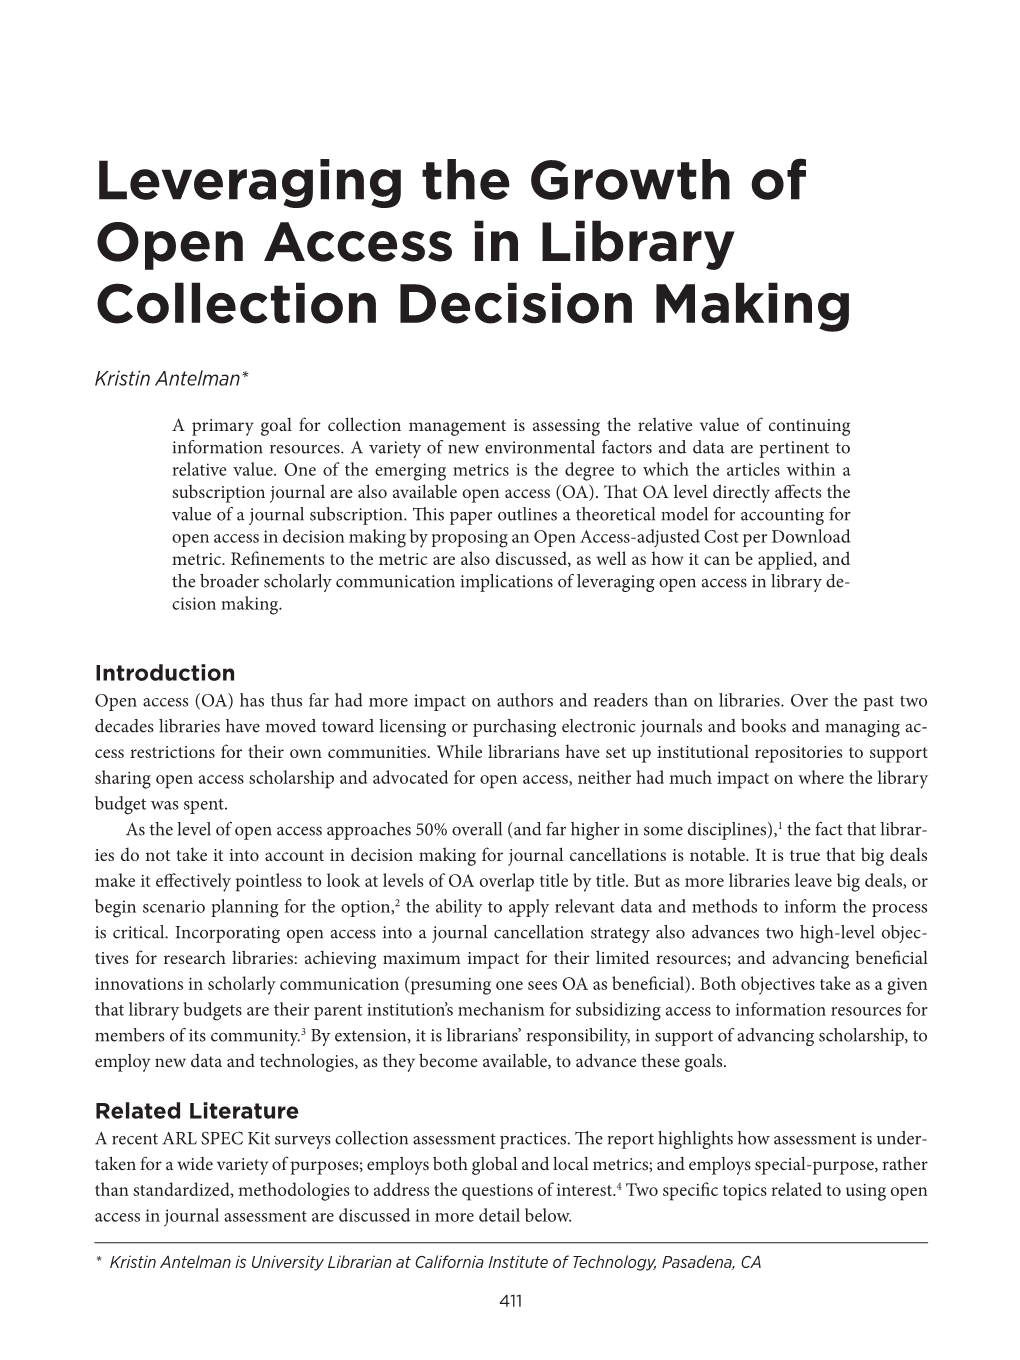 Leveraging the Growth of Open Access in Library Collection Decision Making